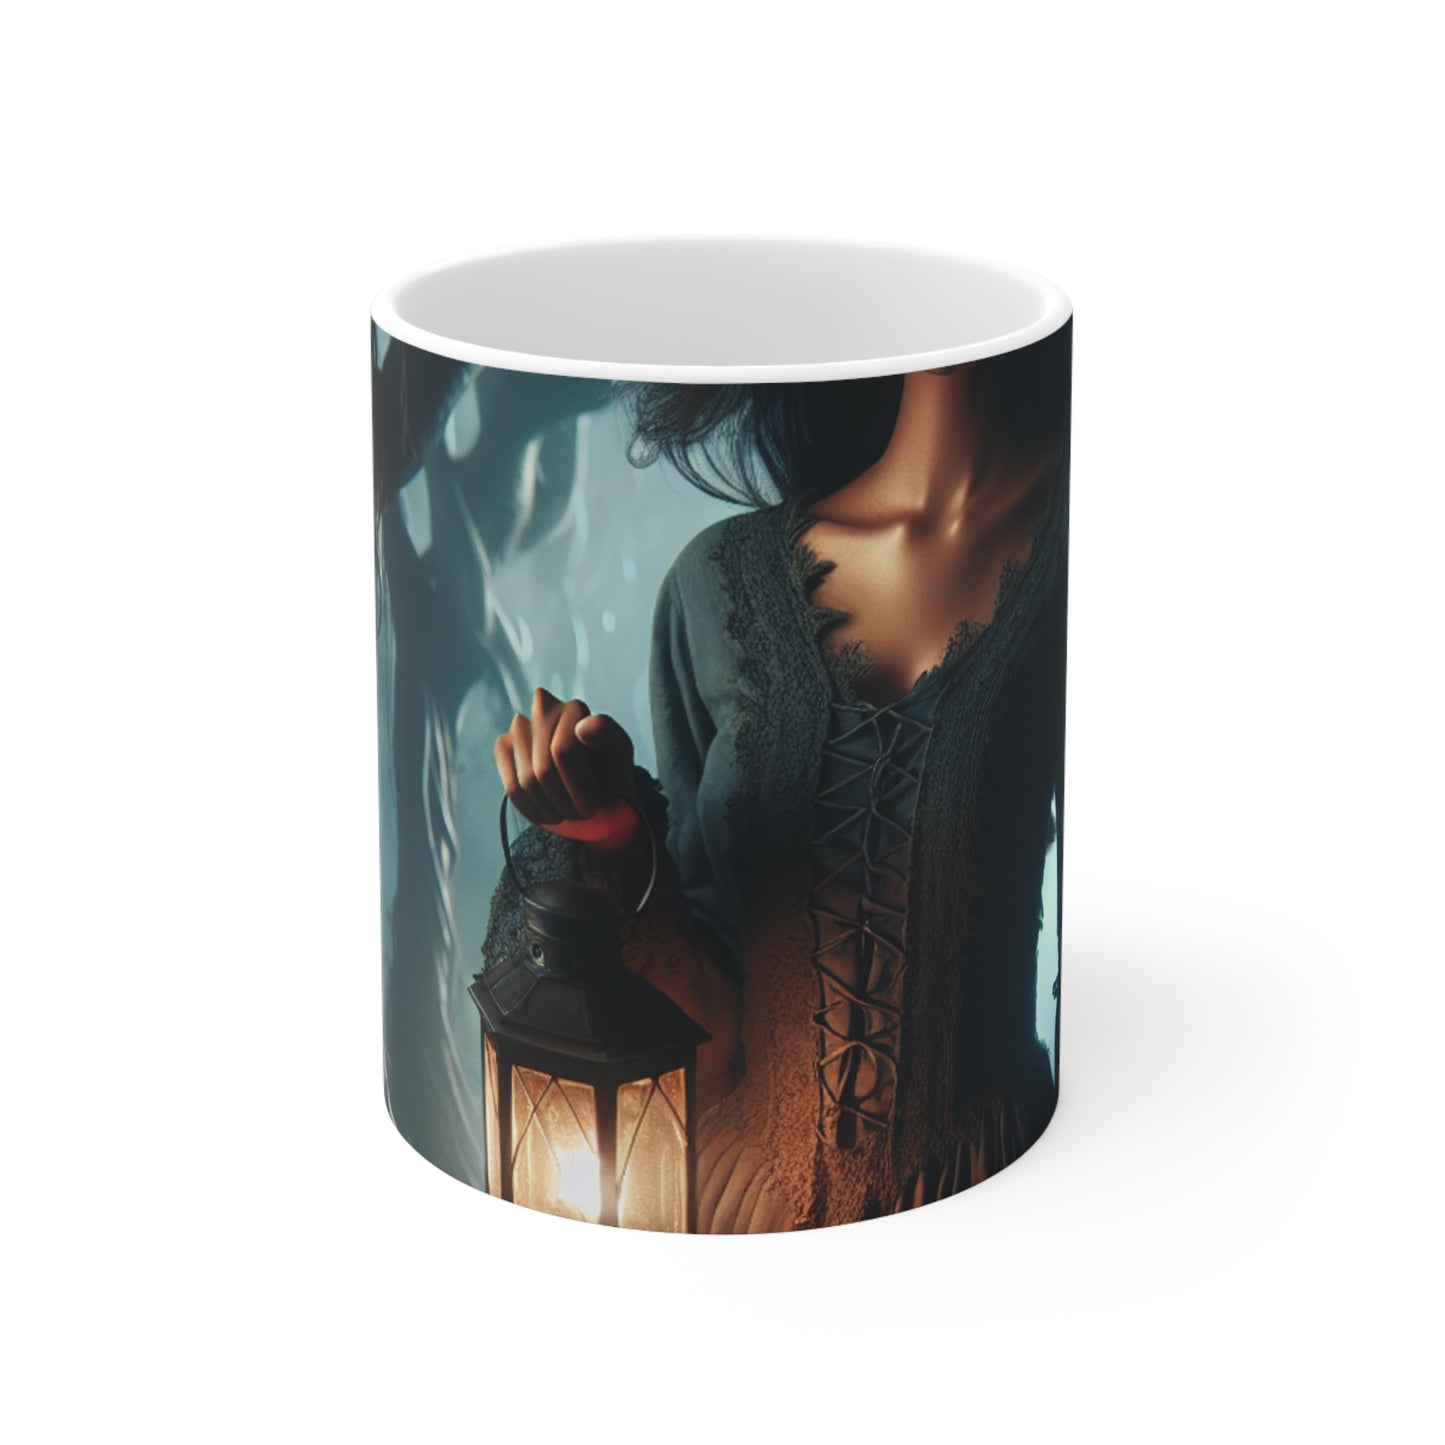 "Ready for Battle in the Twisted Woods" - The Alien Ceramic Mug 11oz Gothic Art Style